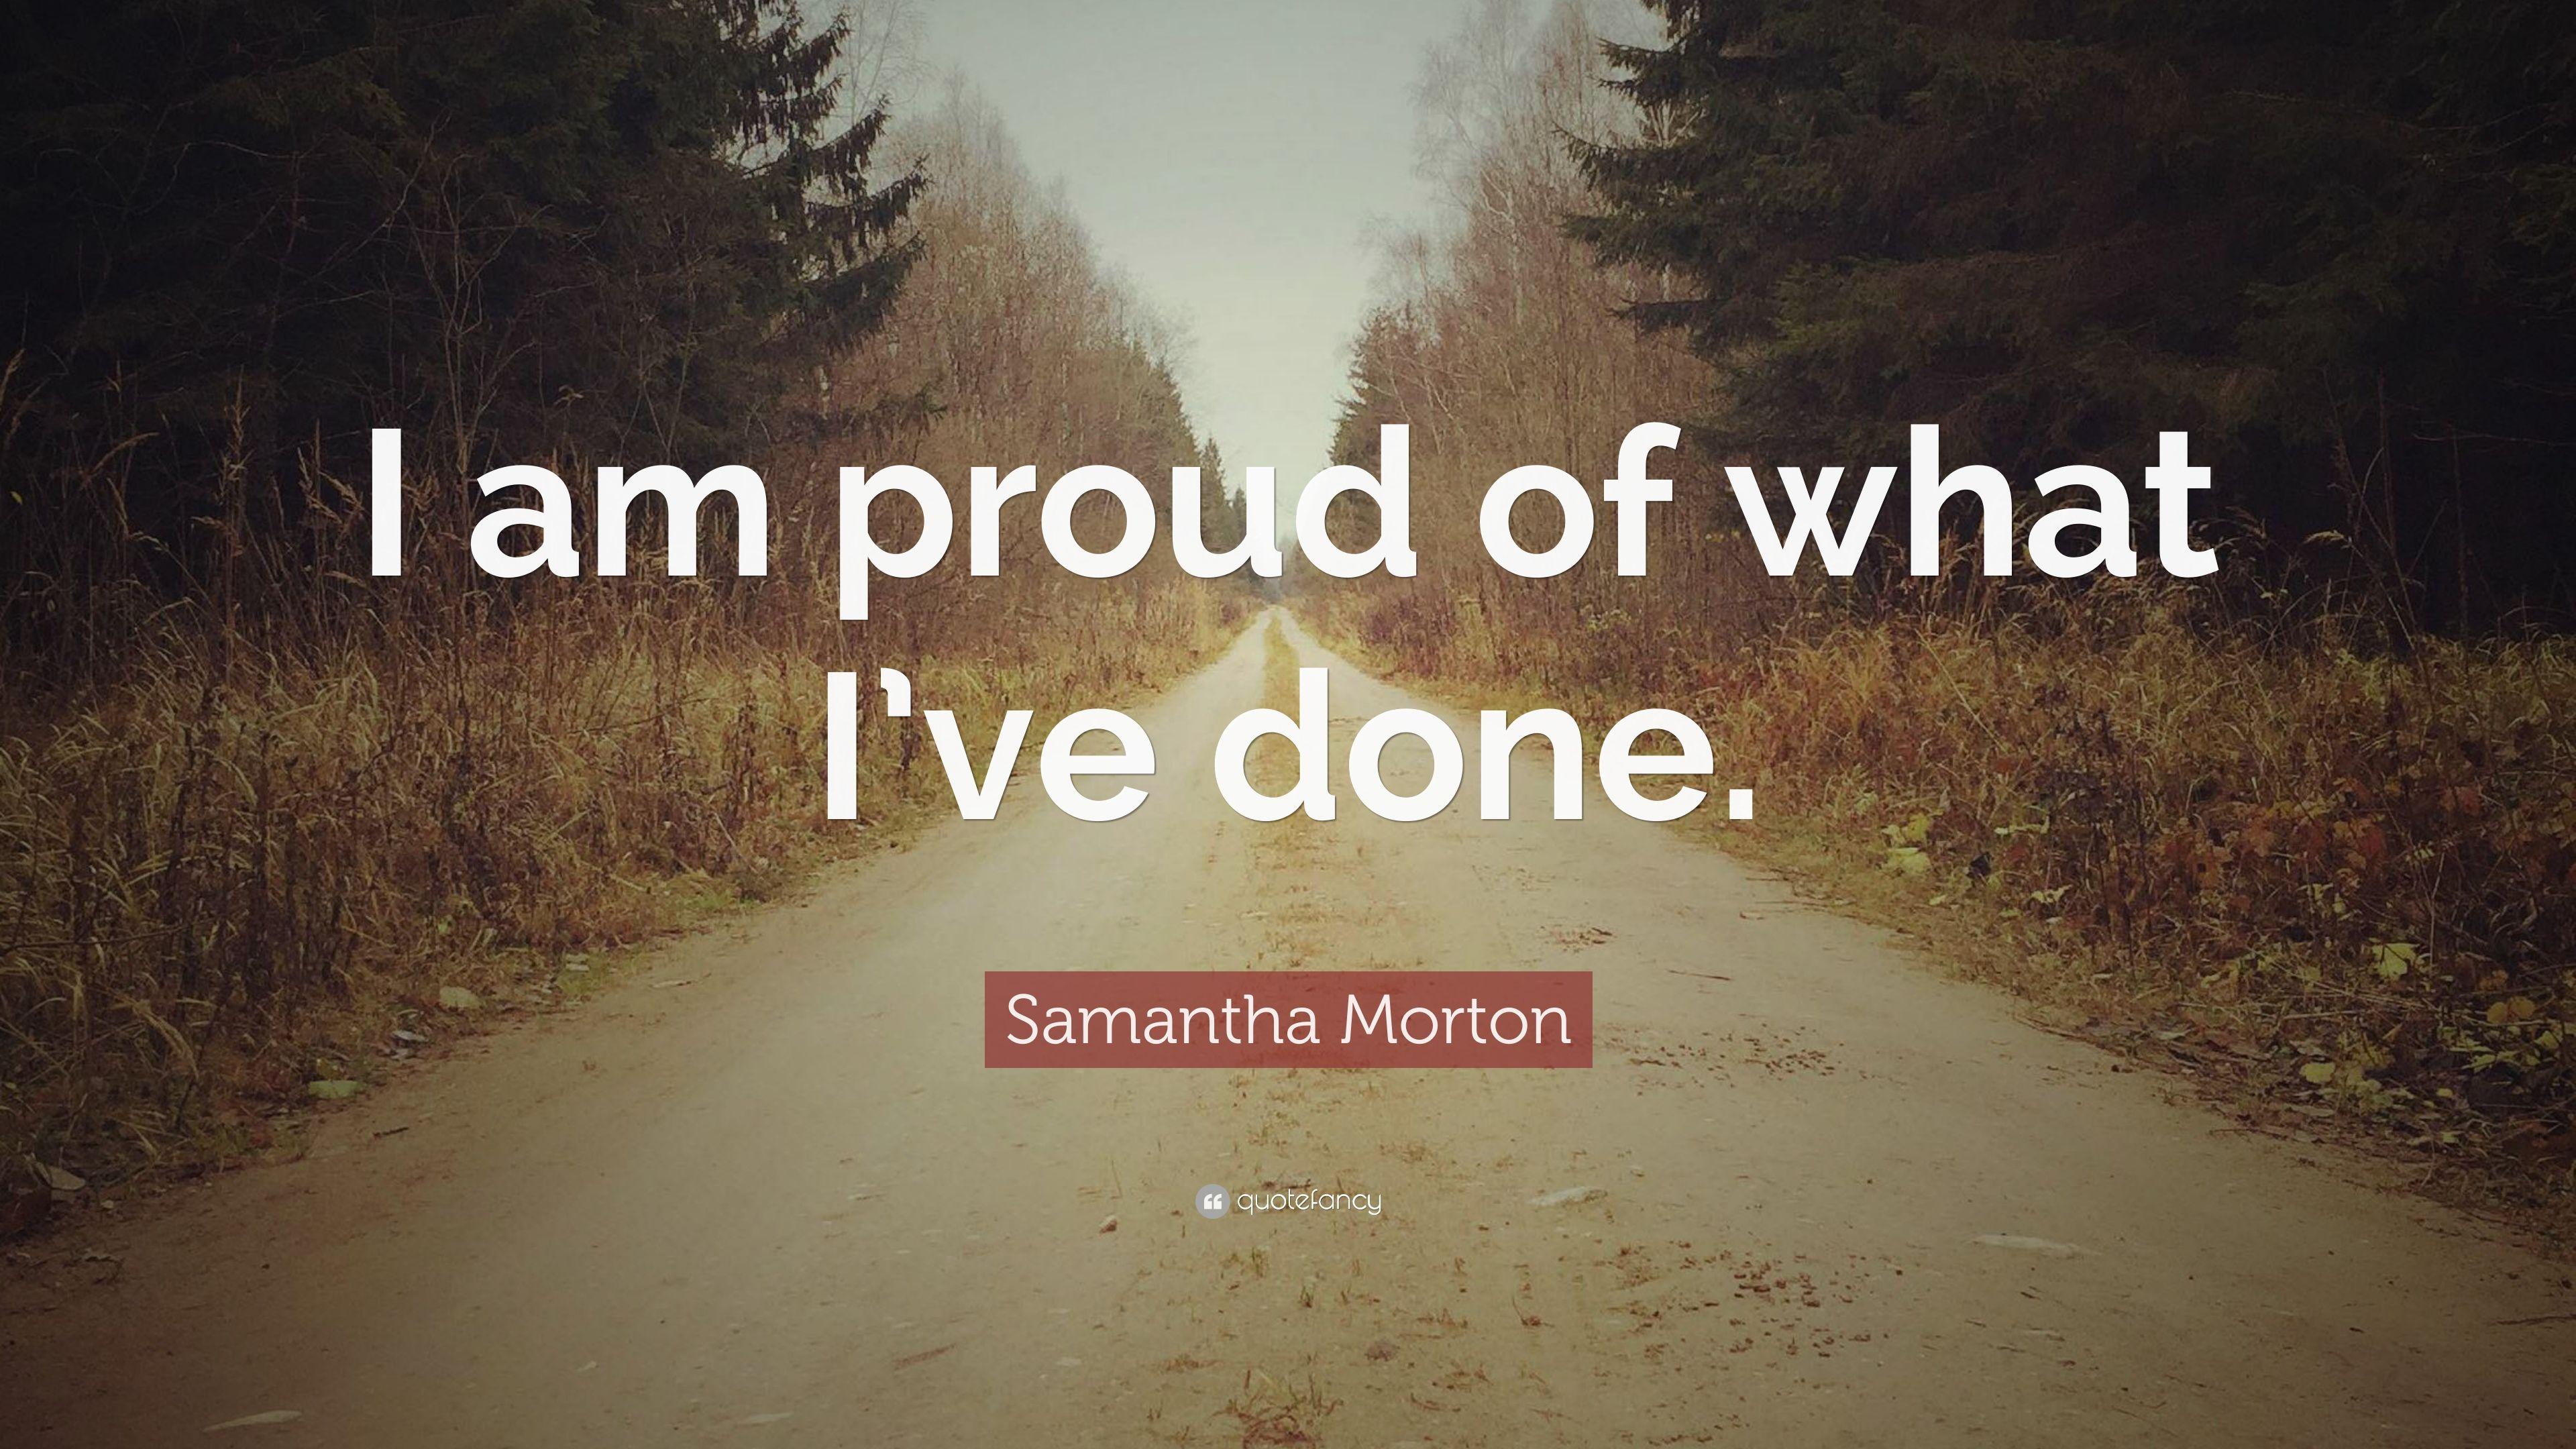 Samantha Morton Quote: “I am proud of what I've done.” 7 wallpaper